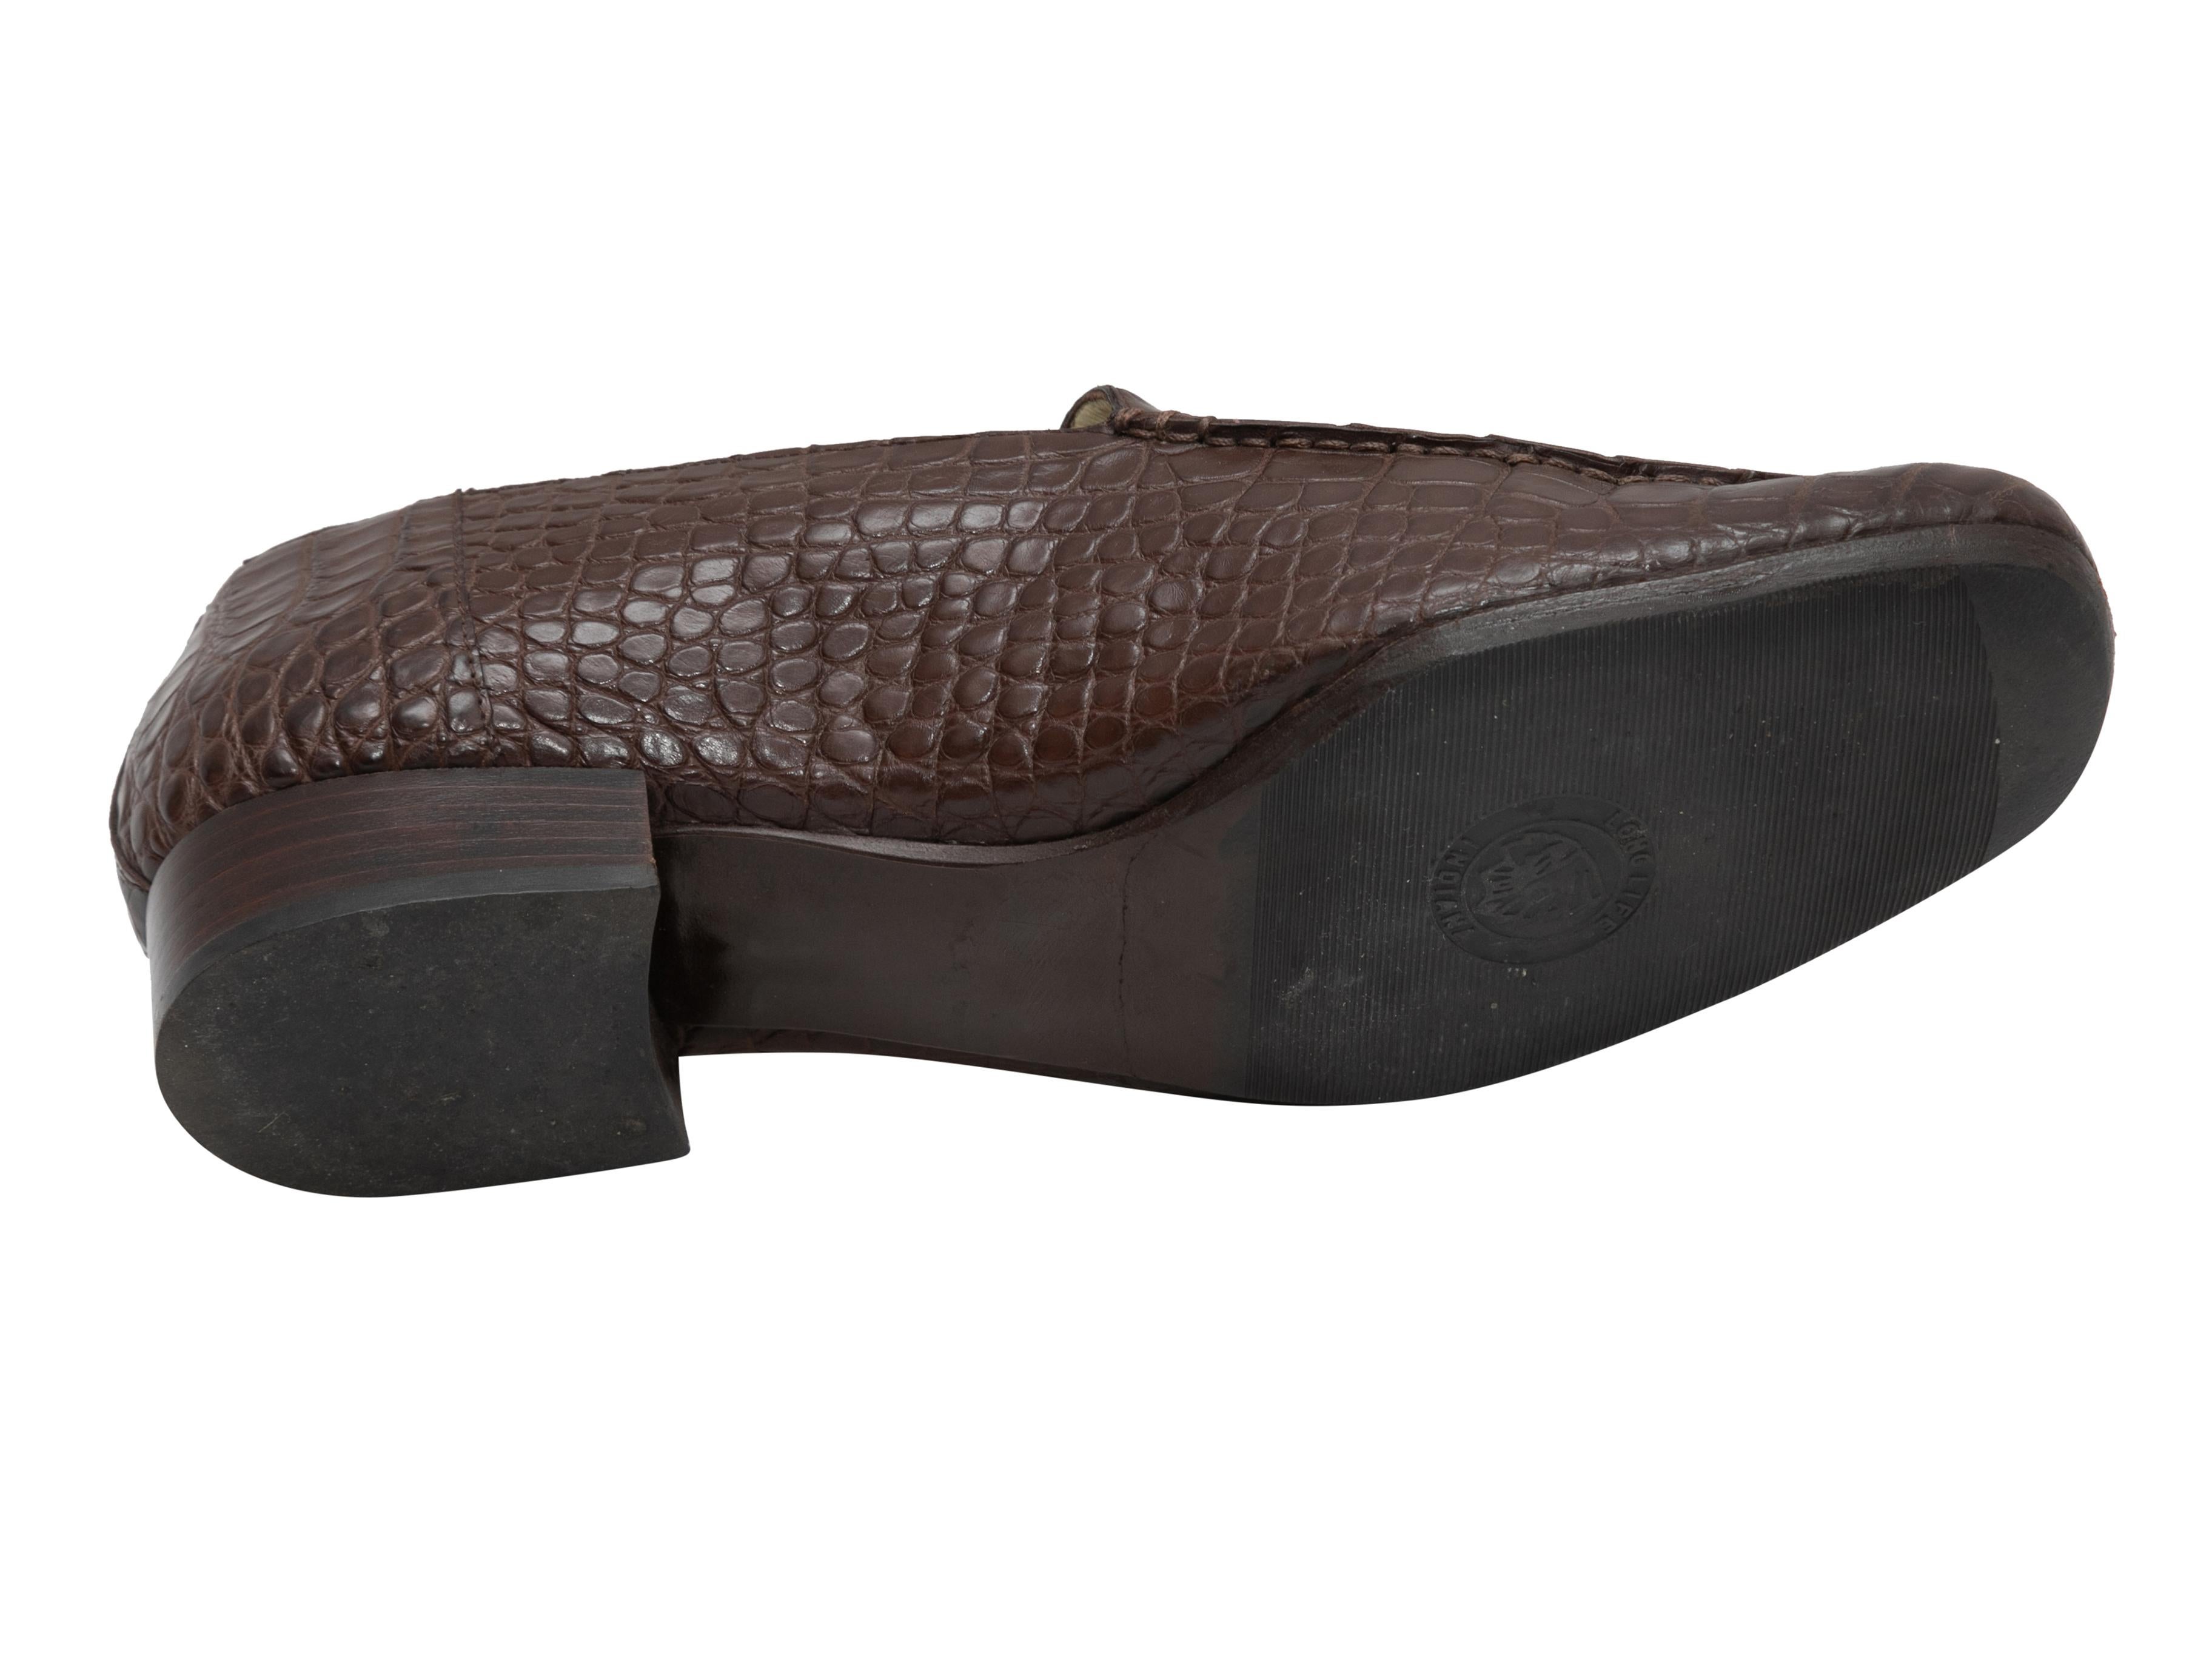 Brown croc skin loafers by Luciano Barbera. Stacked heels. 1